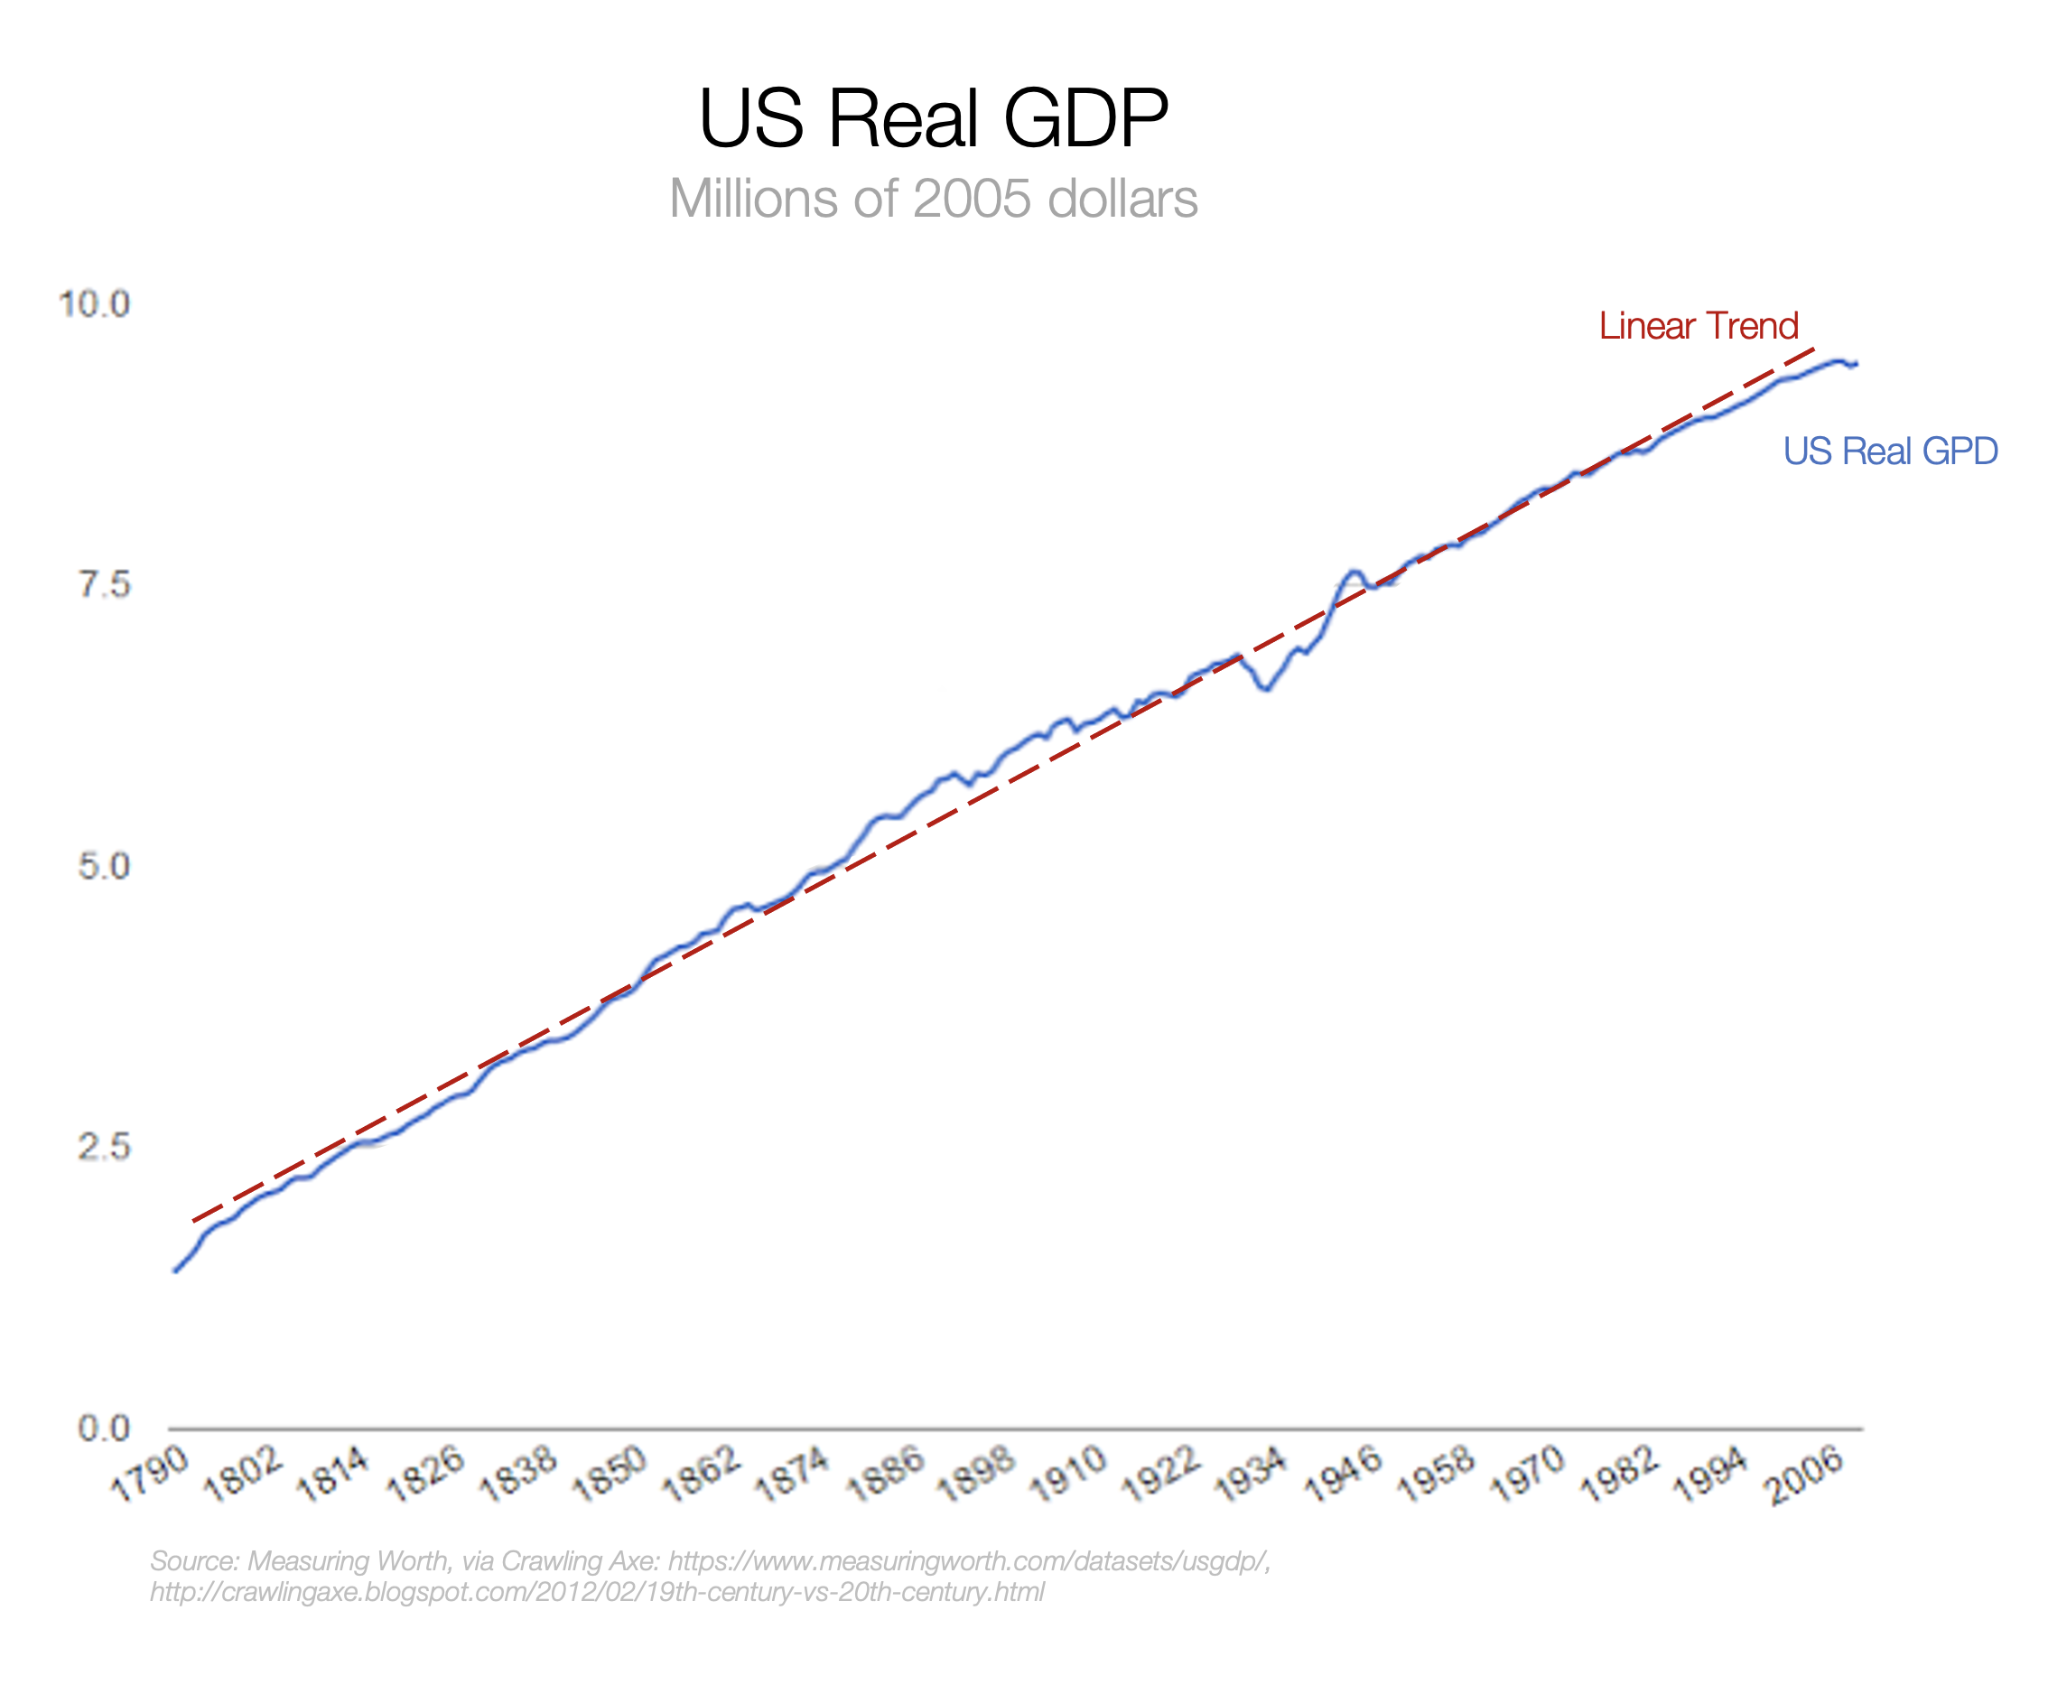 US Real GDP, journal of wild culture ©2021